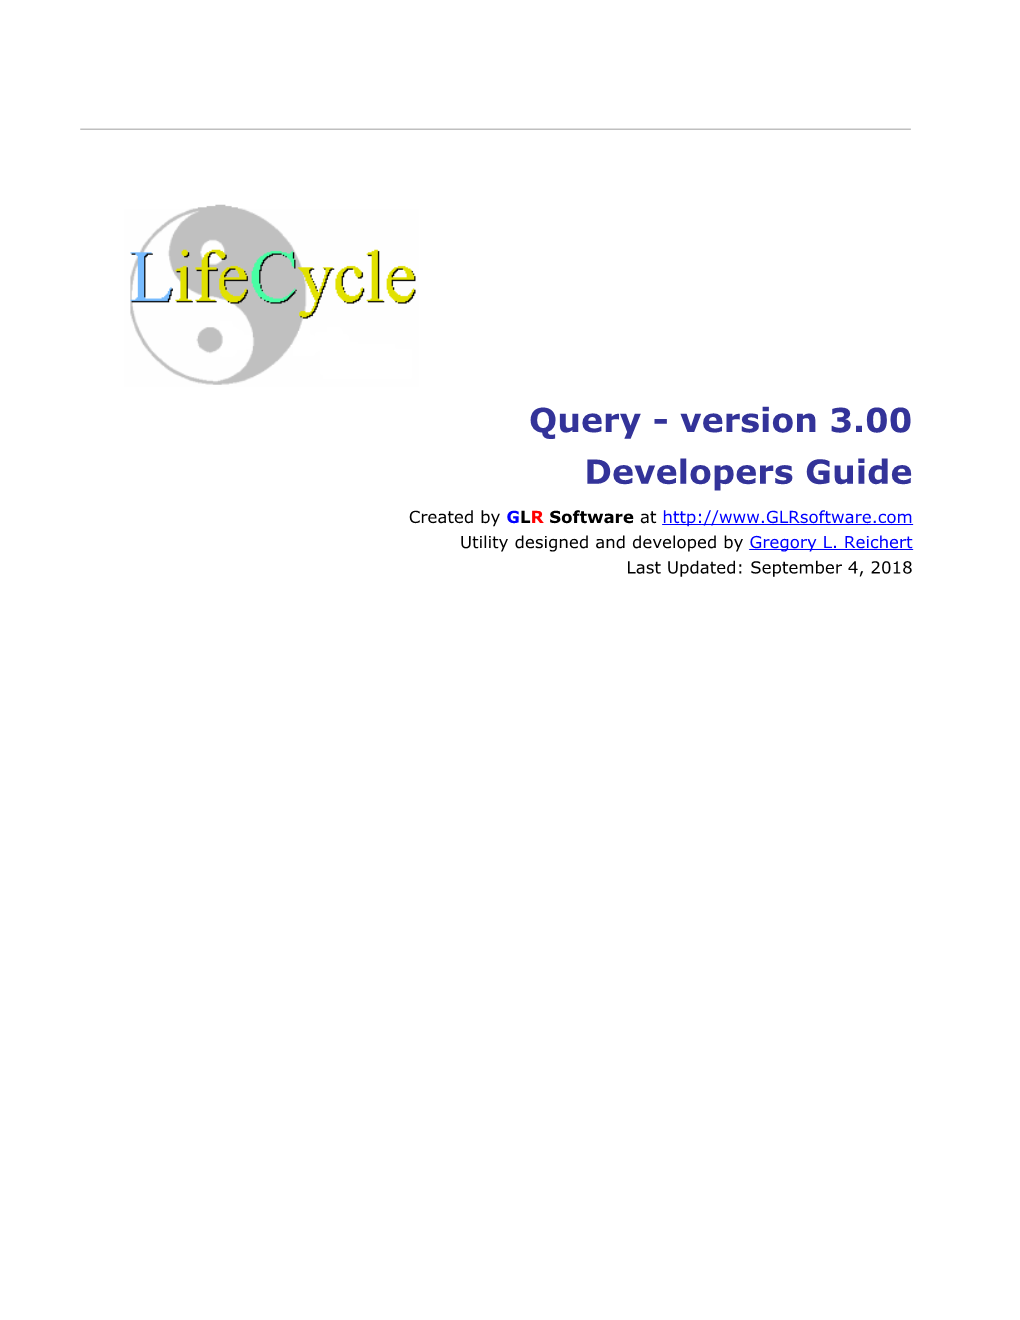 Query 2.0 - Users Guide